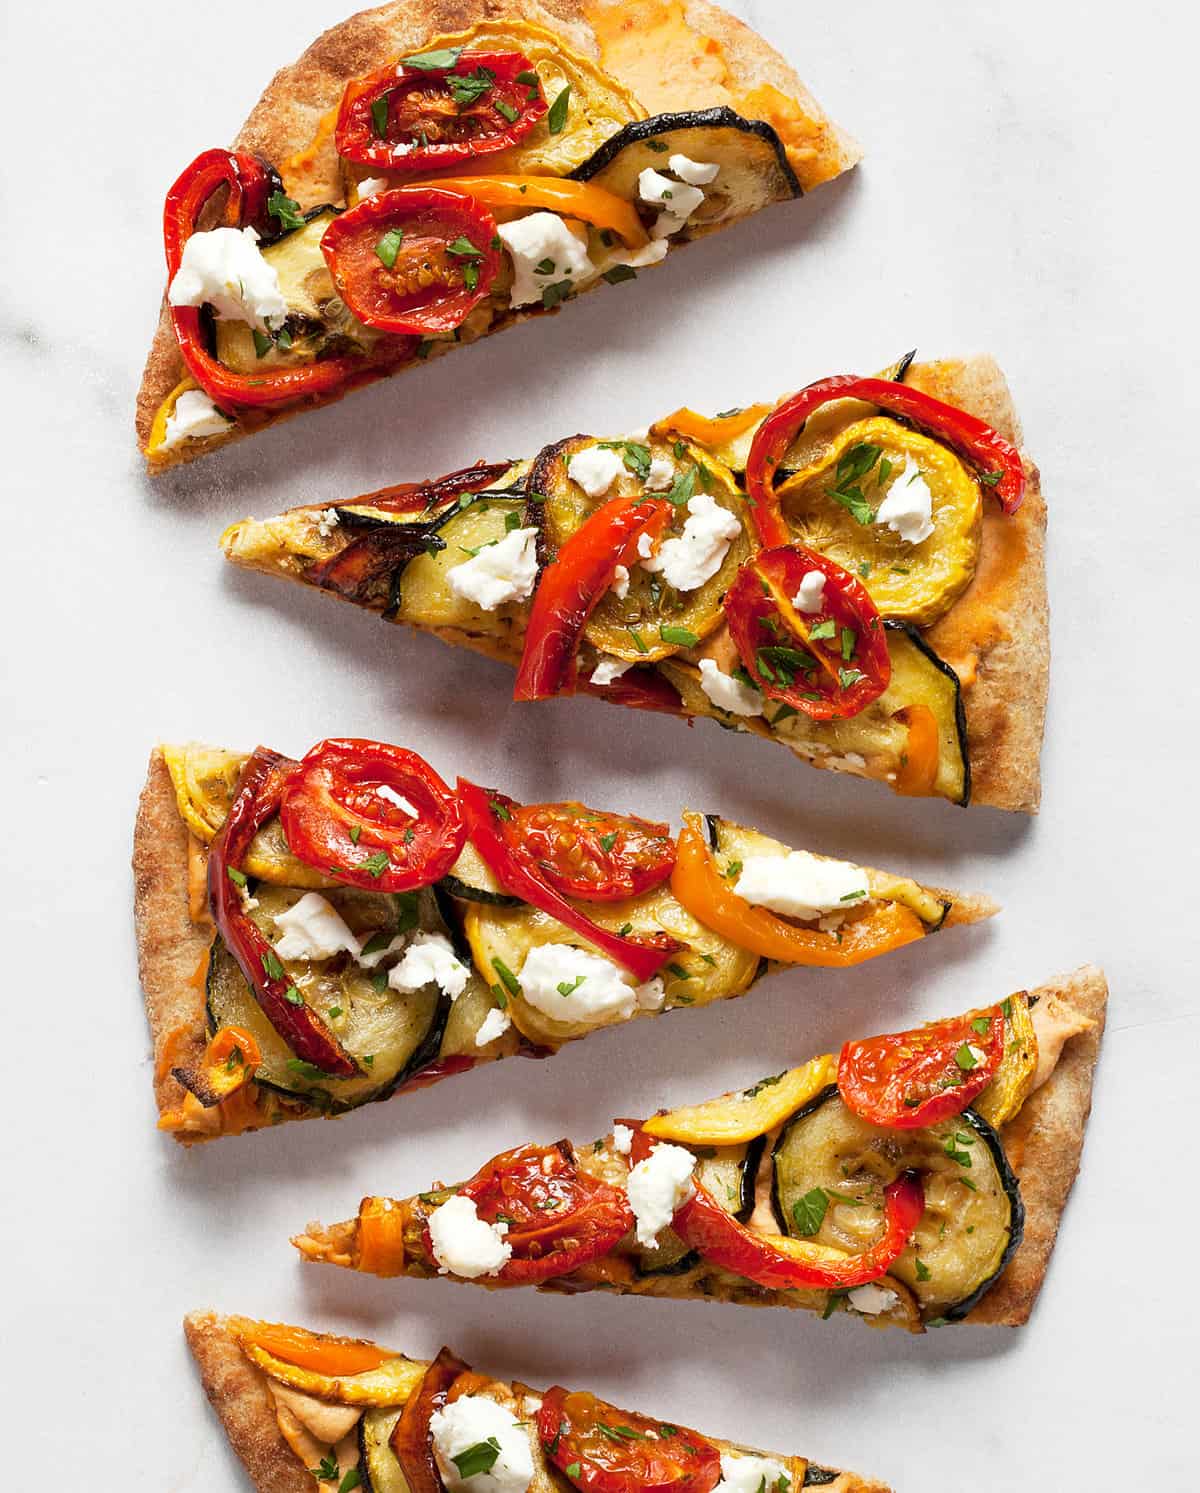 Sliced of naan flatbread topped with roasted vegetables and feta.